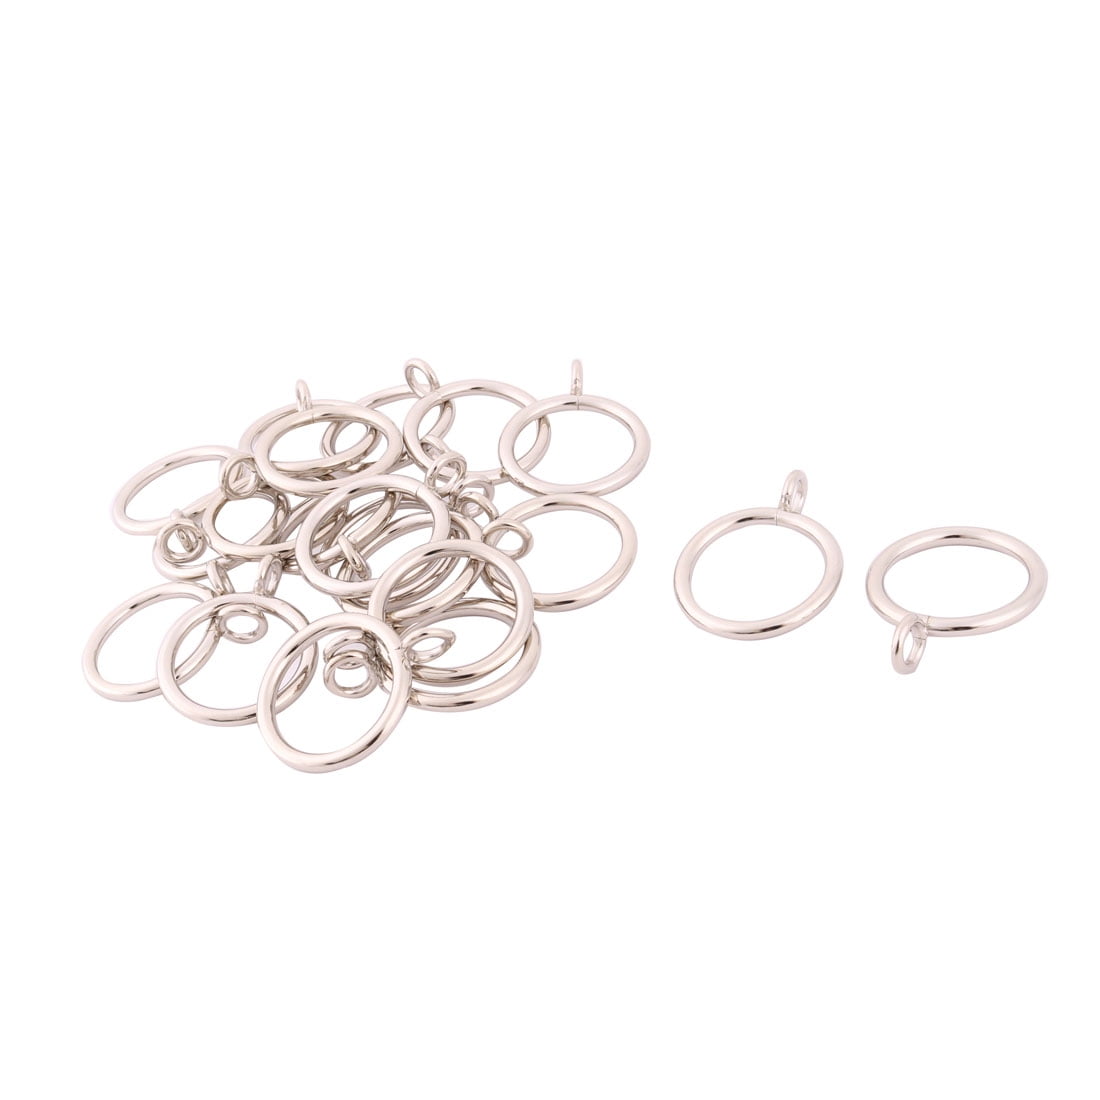 Set of 20 Details about   1.5 Inch Metal Curtain Ring Clips 1.5" Inside Diameter 